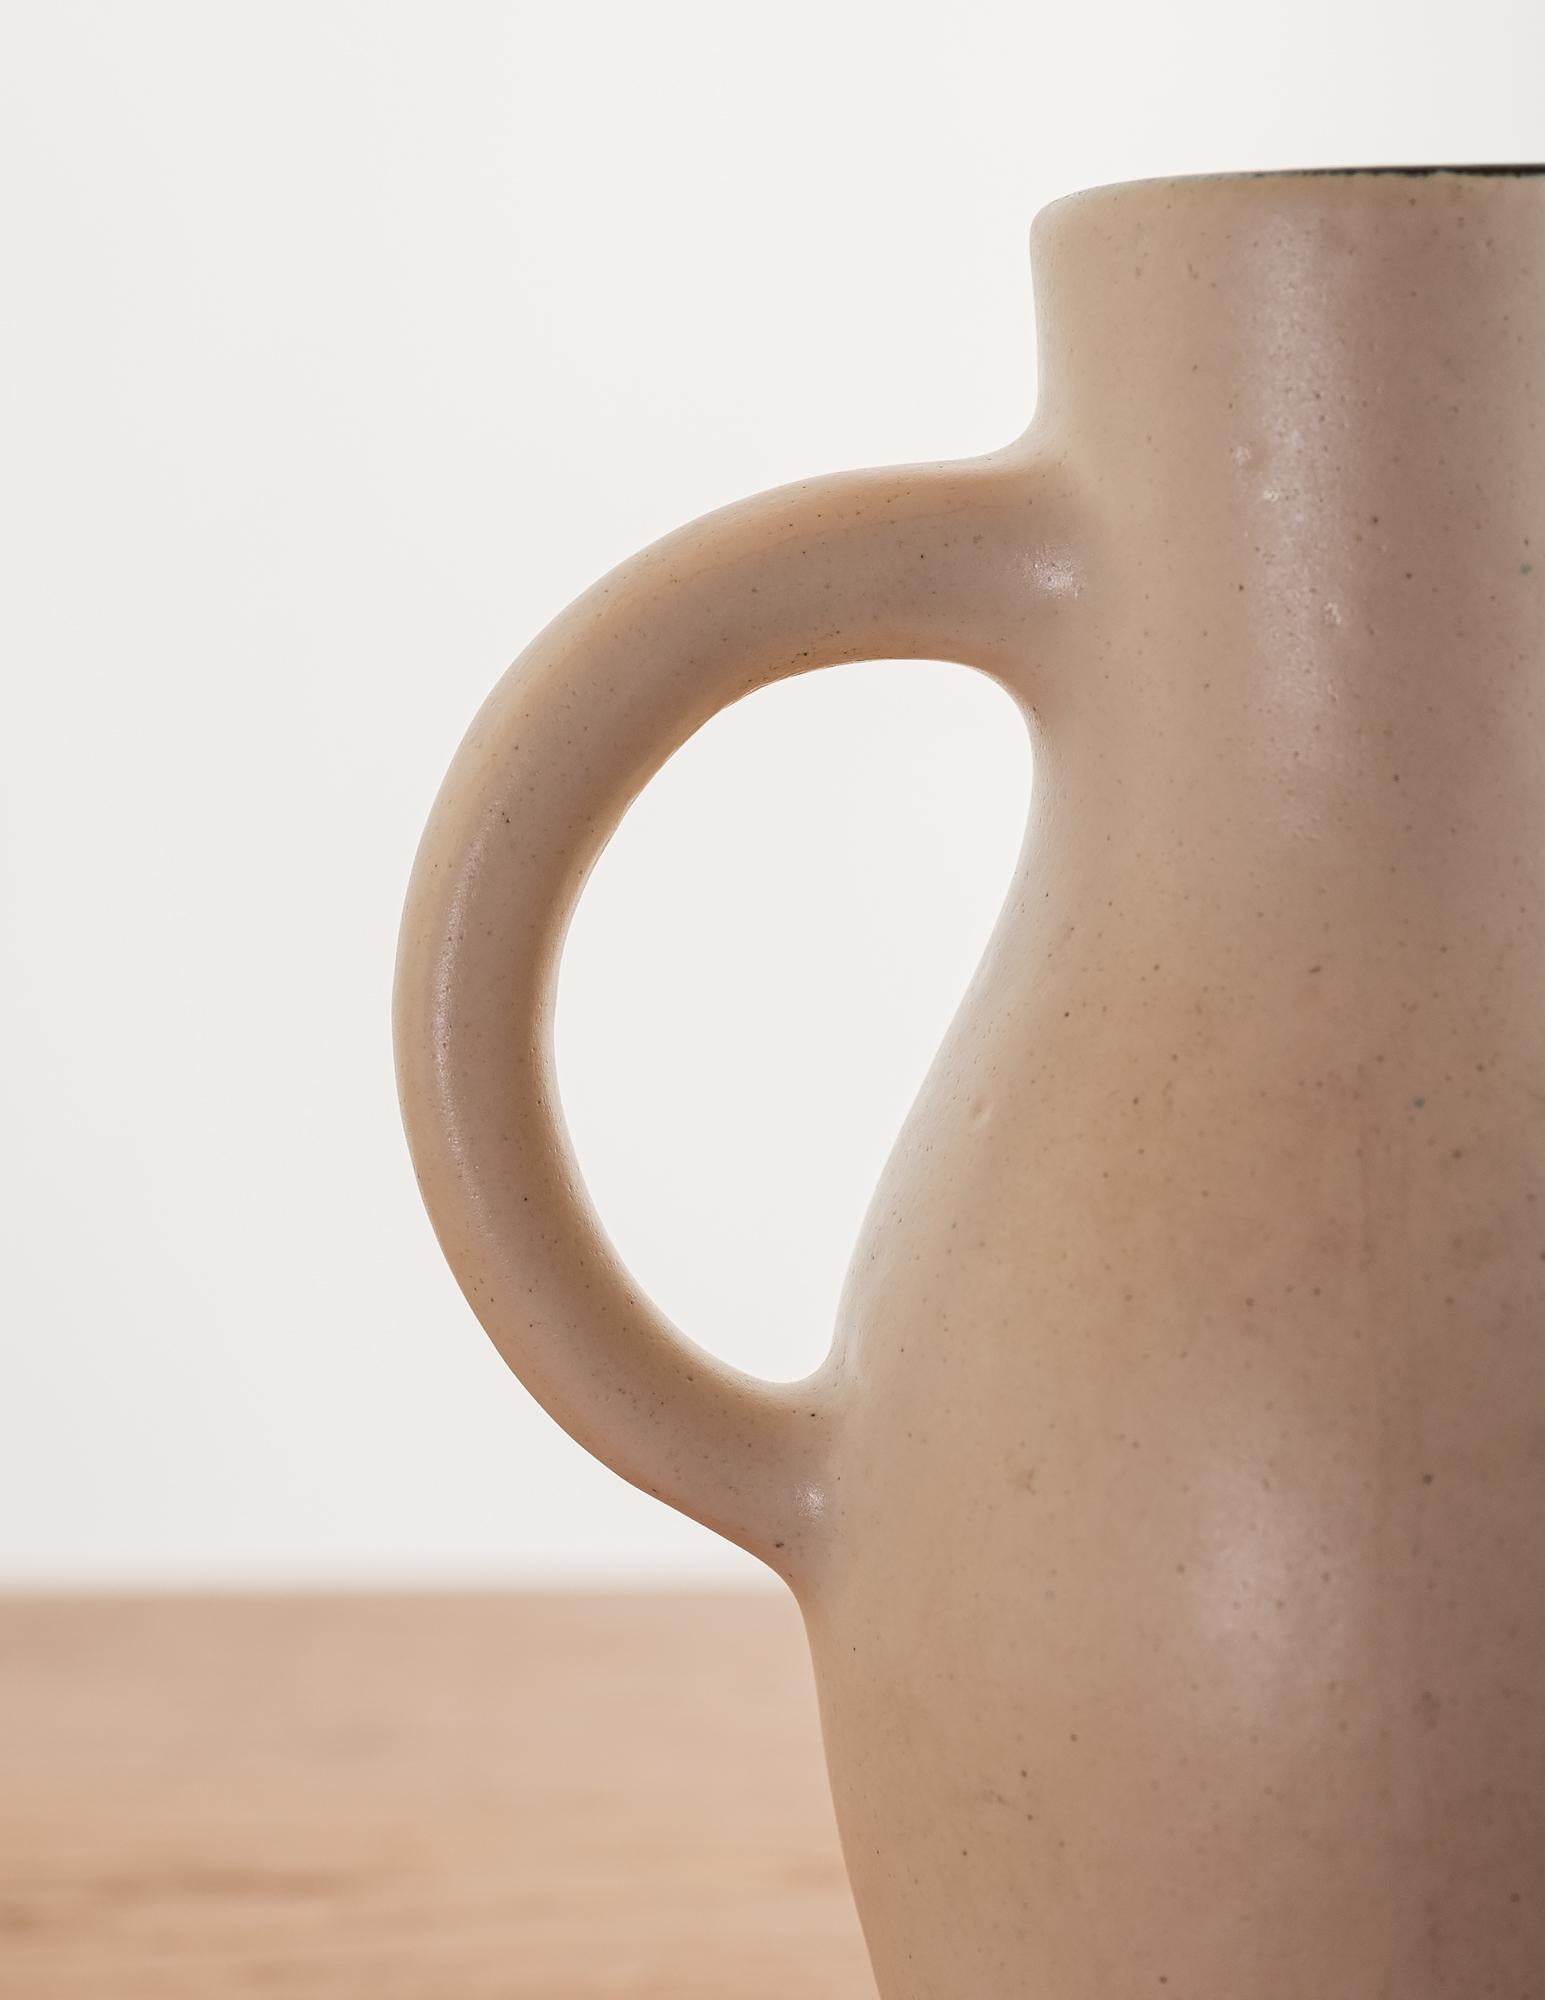 Glazed Georges Jouve Pitcher in Cream with Black Interior, 1950s